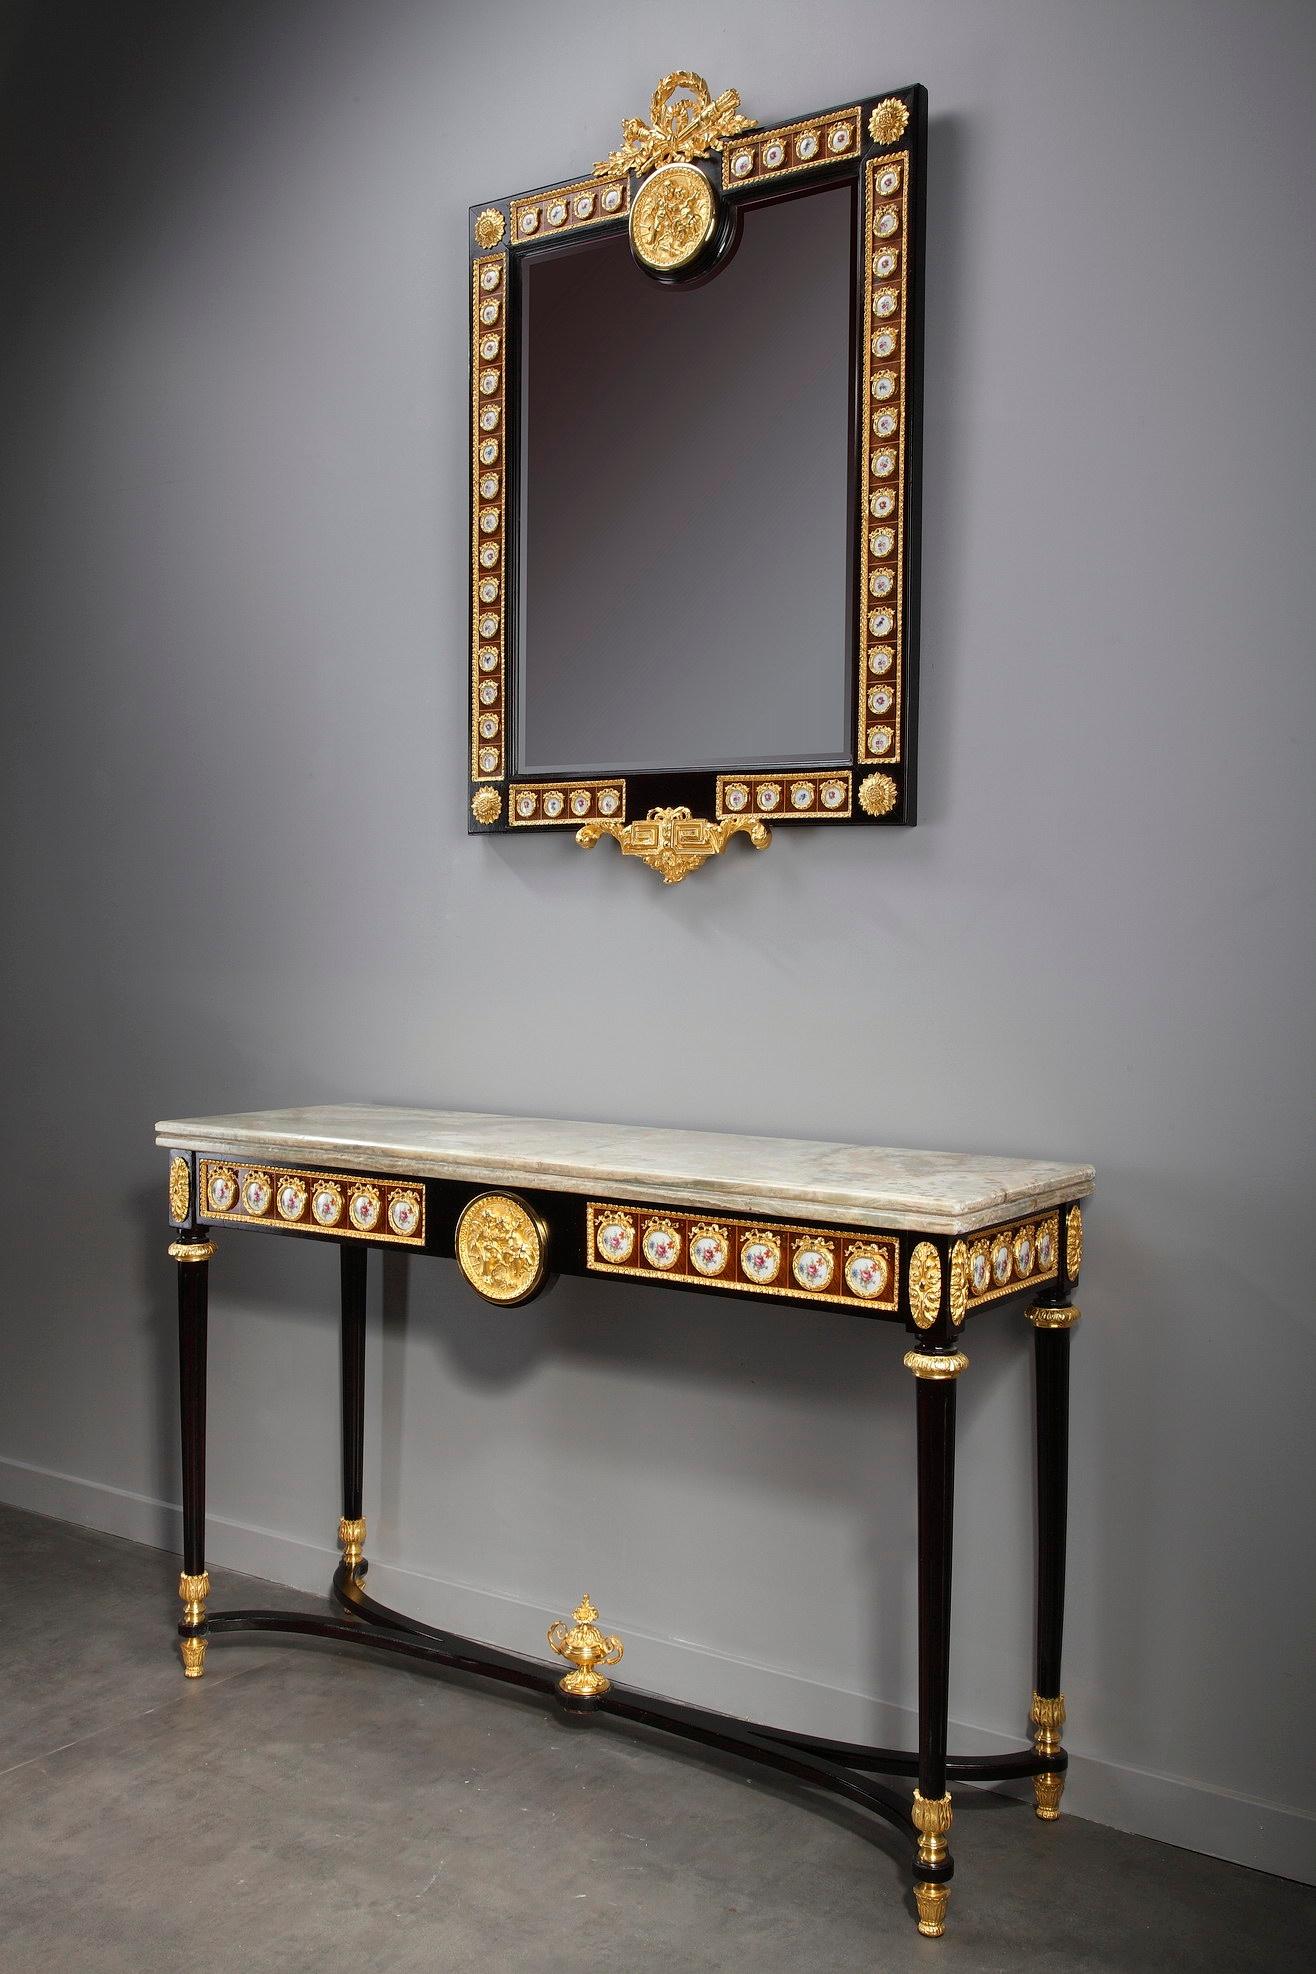 Set of console table and mirror fashioned in the Louis XVI style. Crafted of natural mahogany stained wood, this exquisite set features porcelain and gilt bronze decoration.

The console rests on four straight fluted legs decorated with gilt bronze